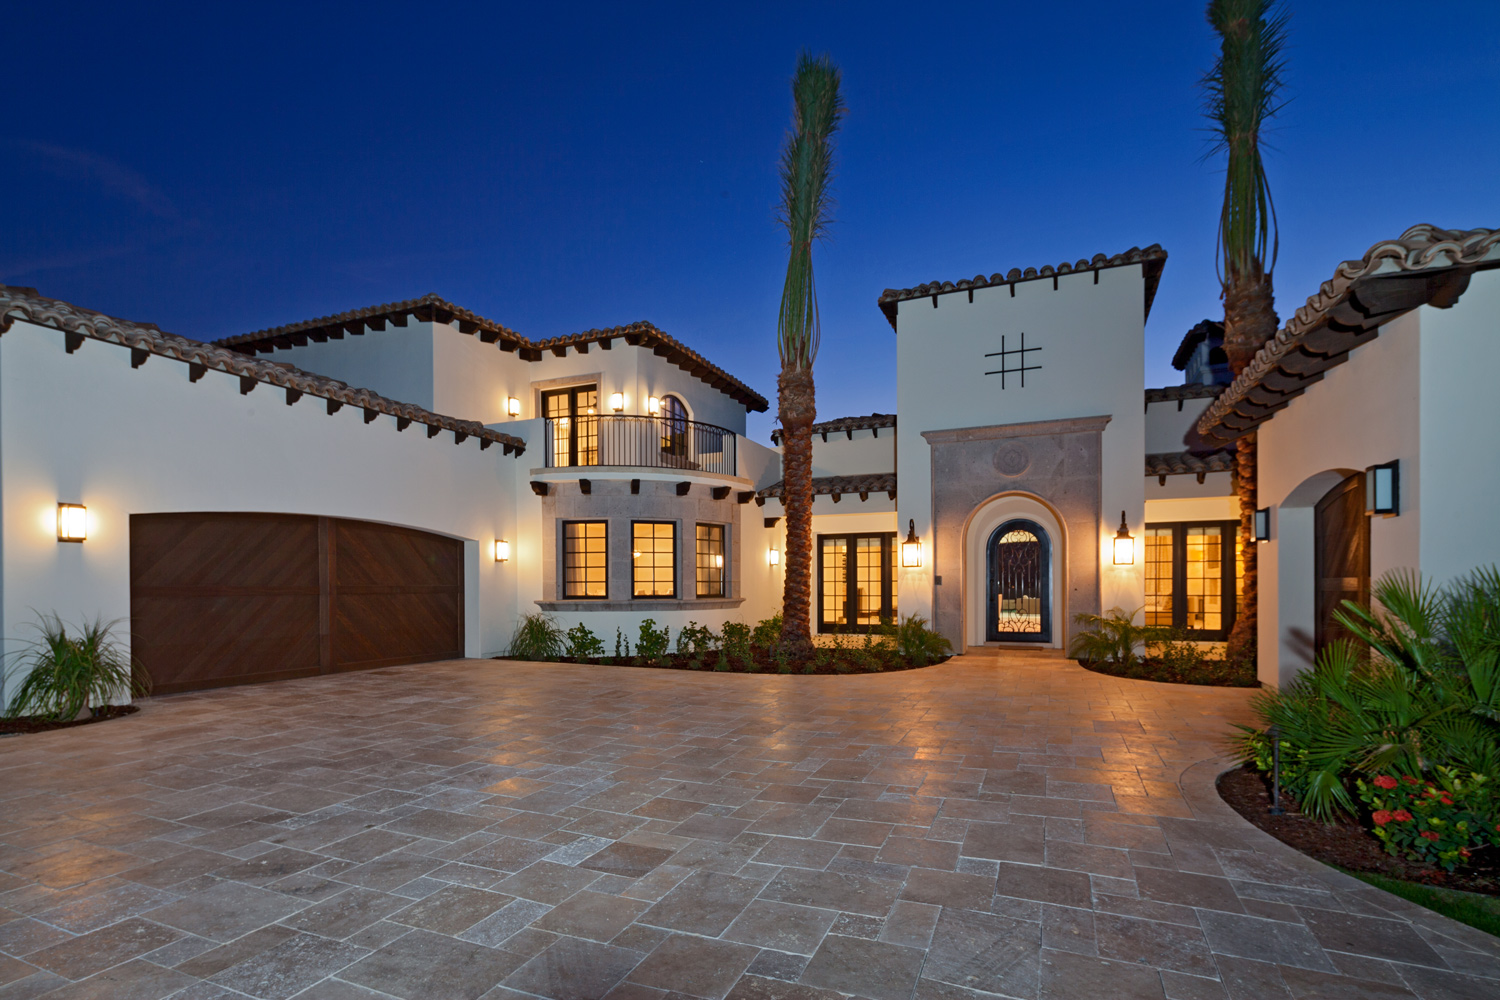 Big-and-magnificent-driveway-that-matches-the-houses-exterior-